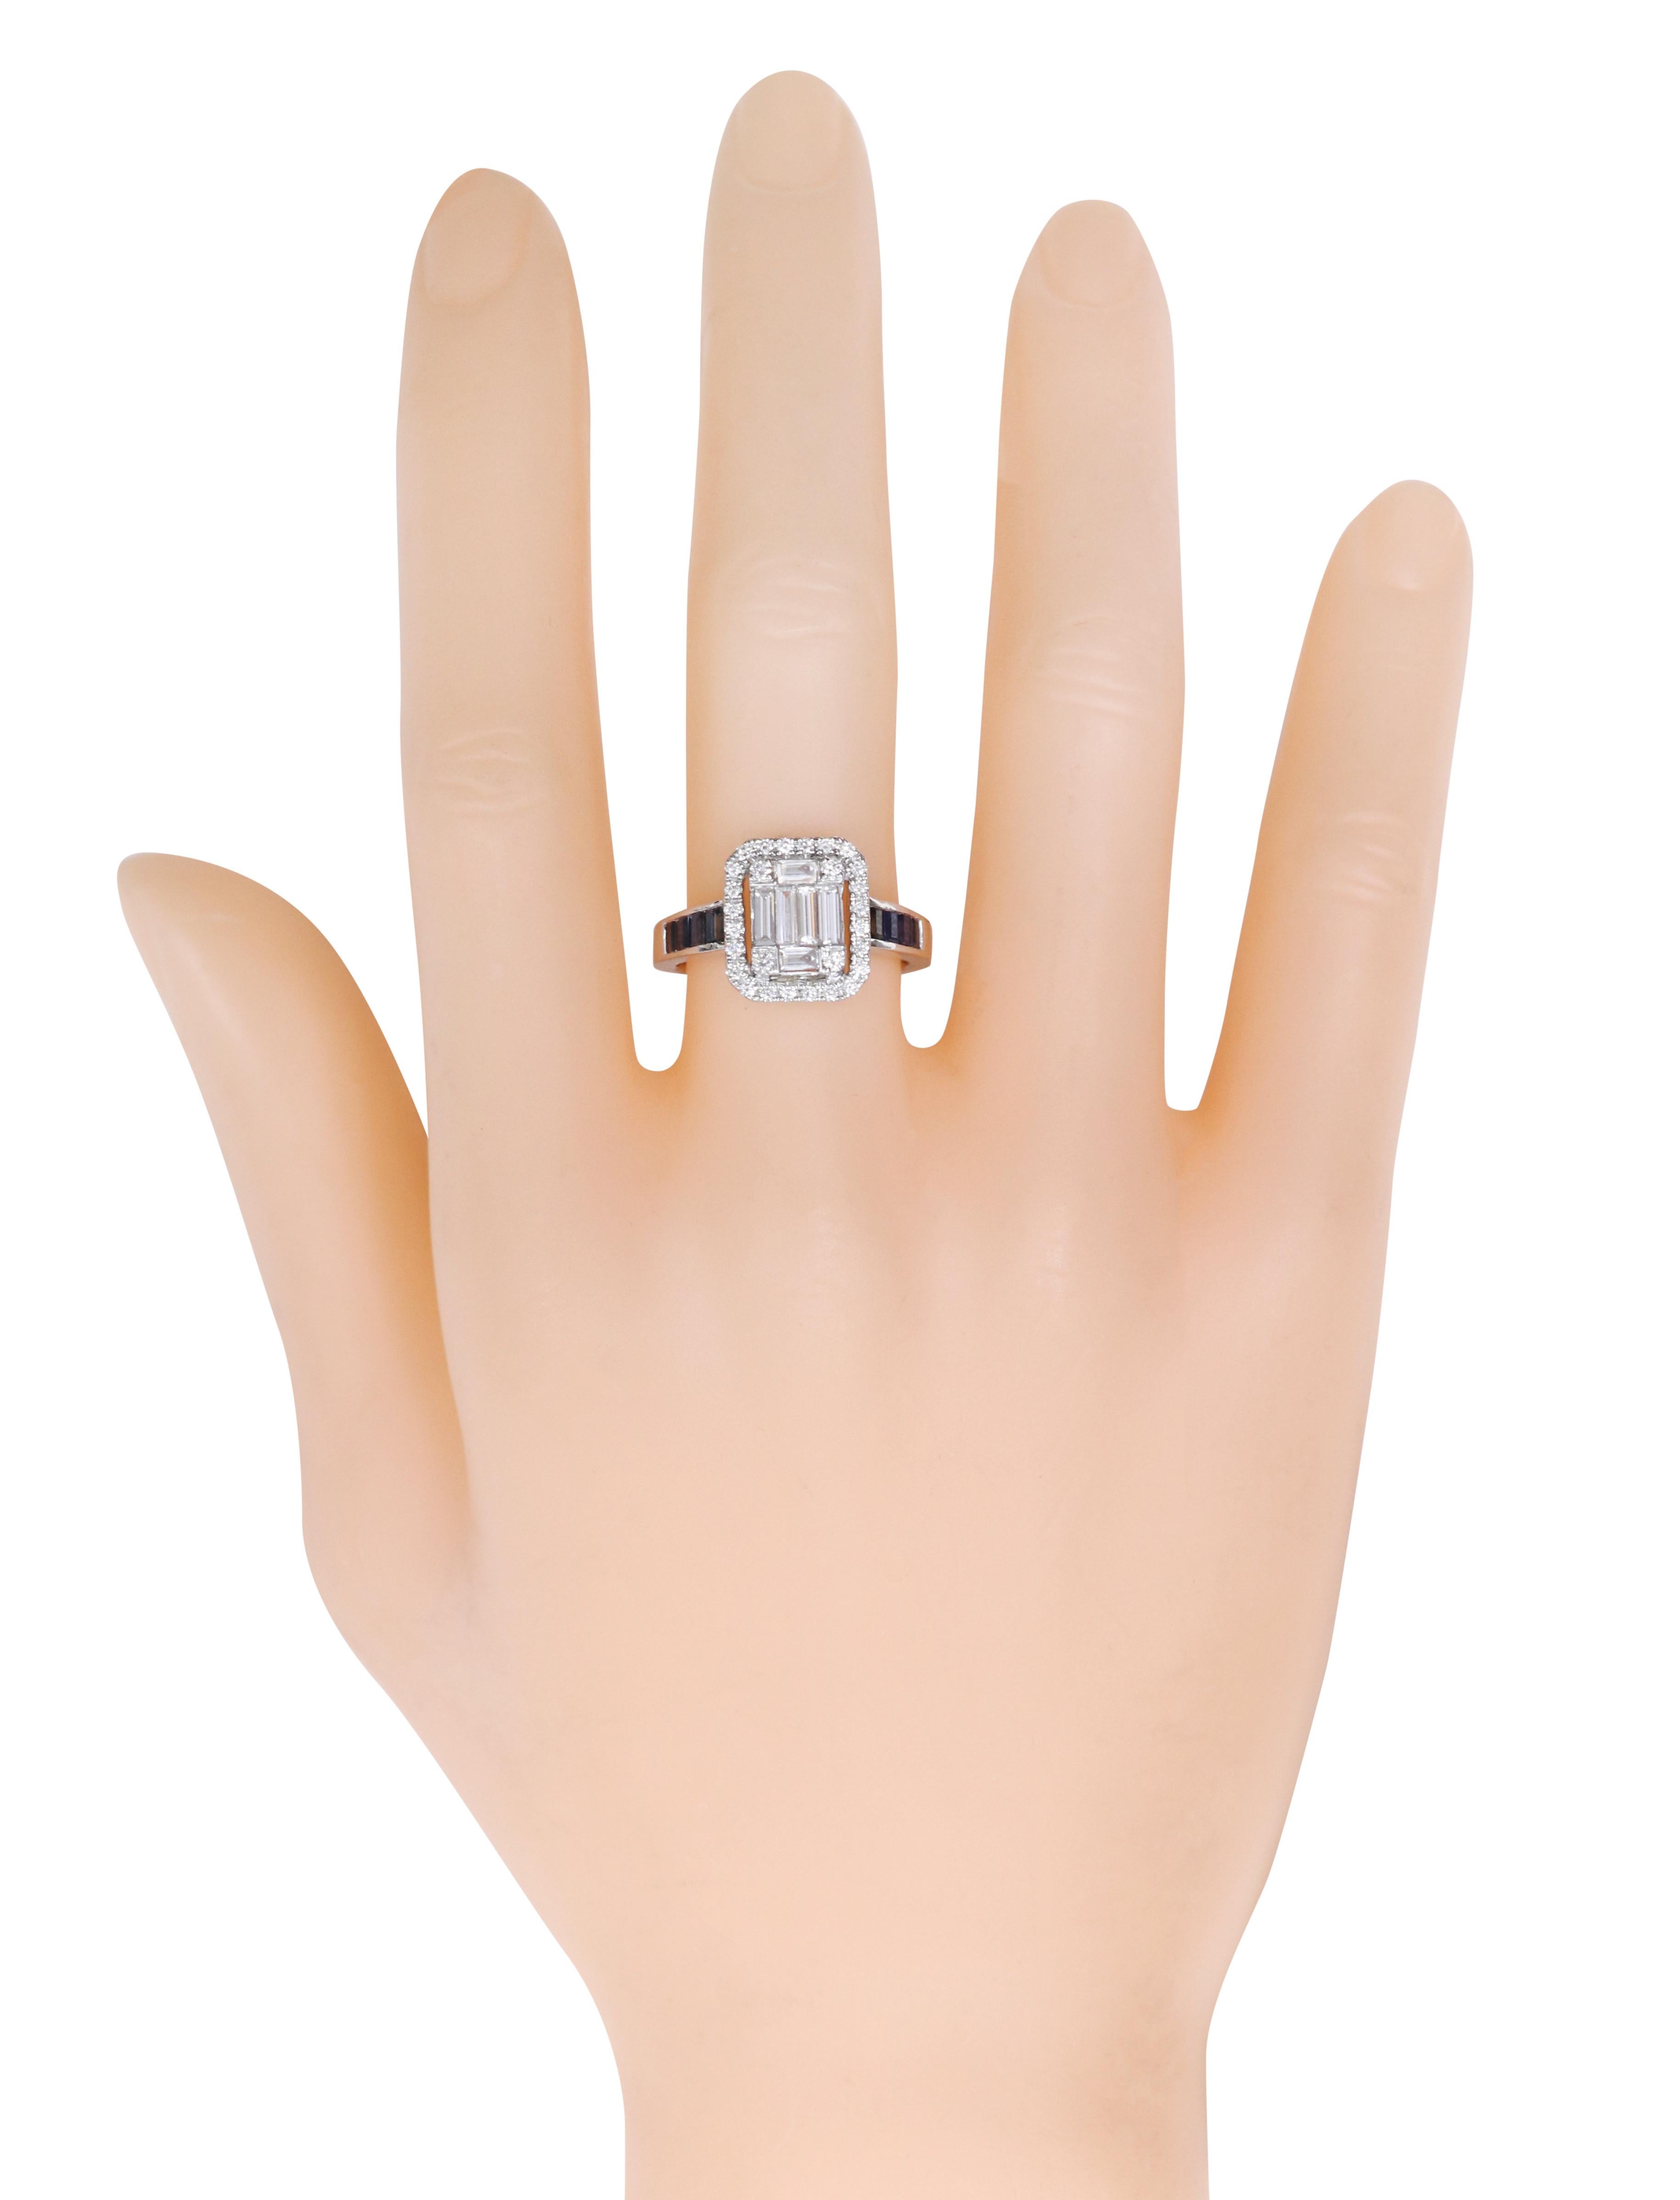 18 Karat White Gold 1.16 Carat Sapphire and Diamond Band and Cluster Ring

Charisma has a language of its own but it speaks through how you carry yourself and the way you carry yourself is always defined by the accessories and the attire you adorn.